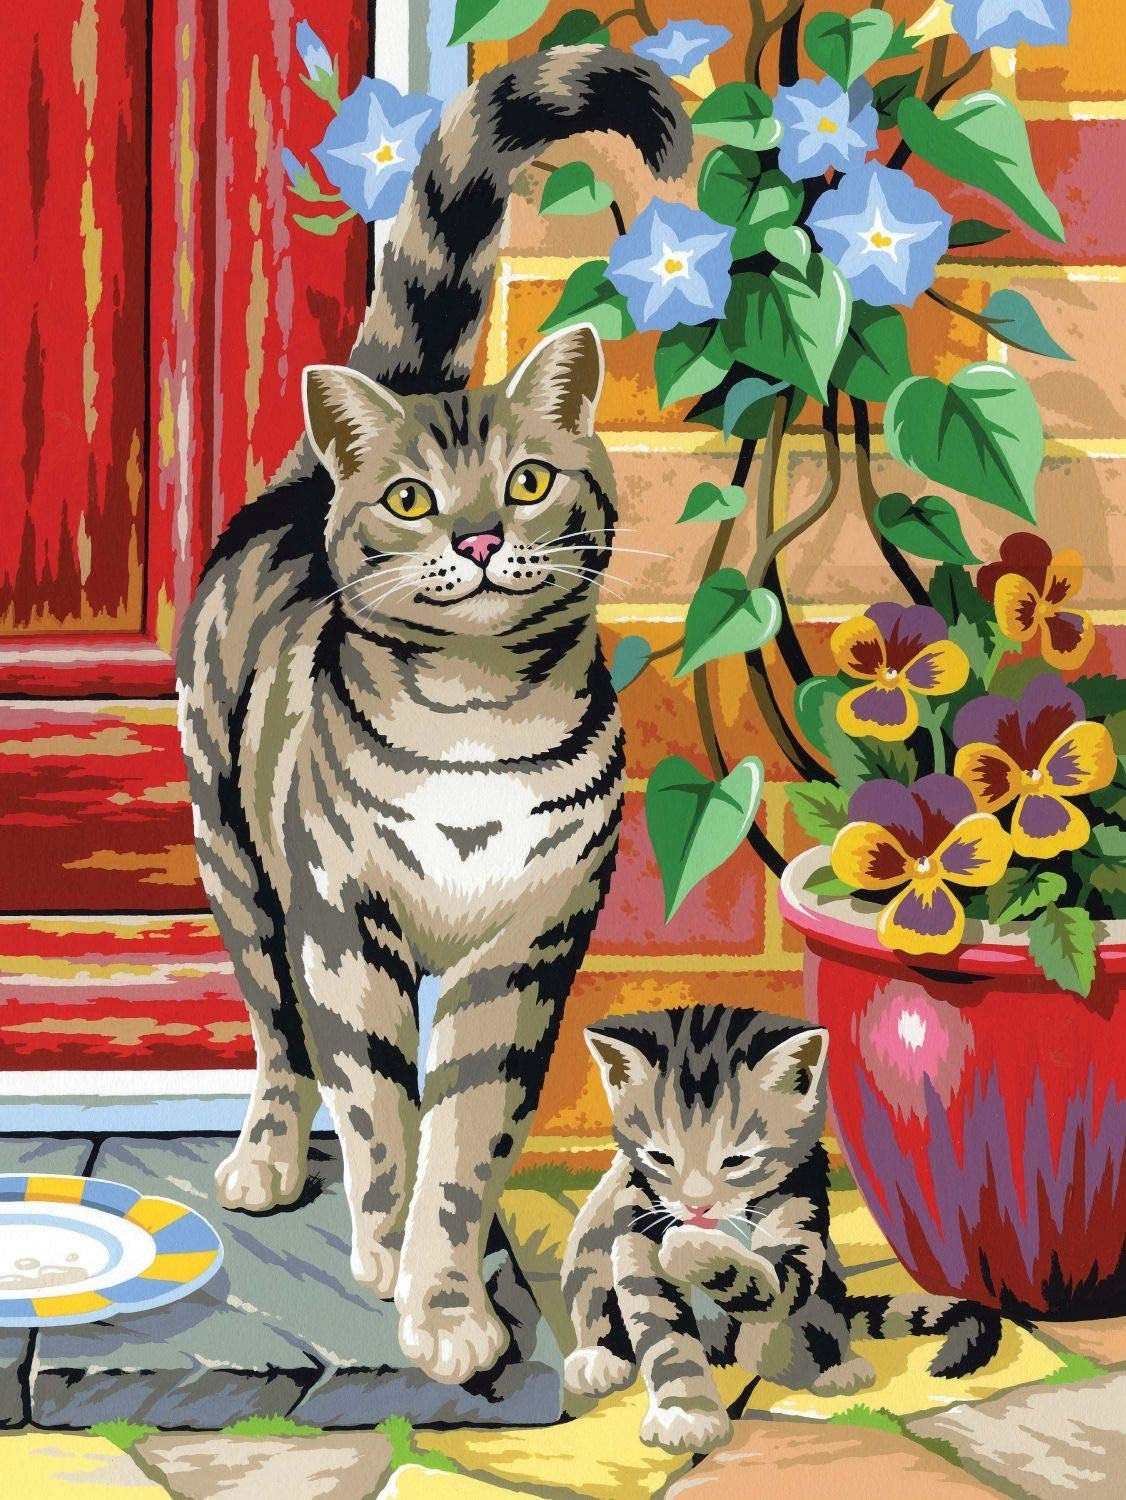 KSG - Twin Pack - Medium Painting on Numbers - Cats